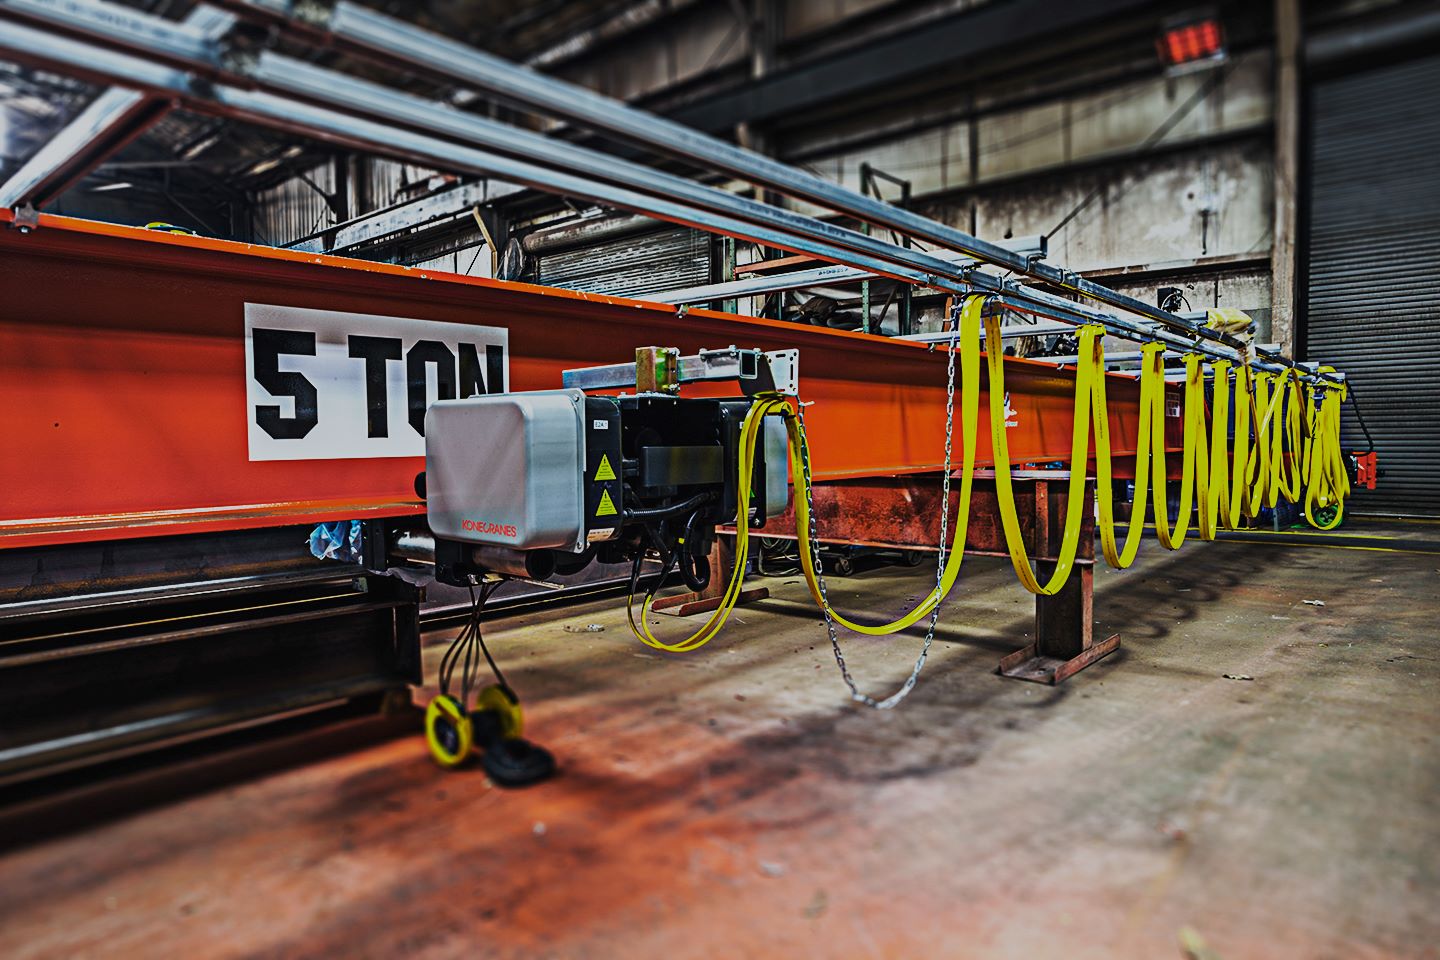 Heads Up: Best Practices for Operating Overhead Cranes and Hoists